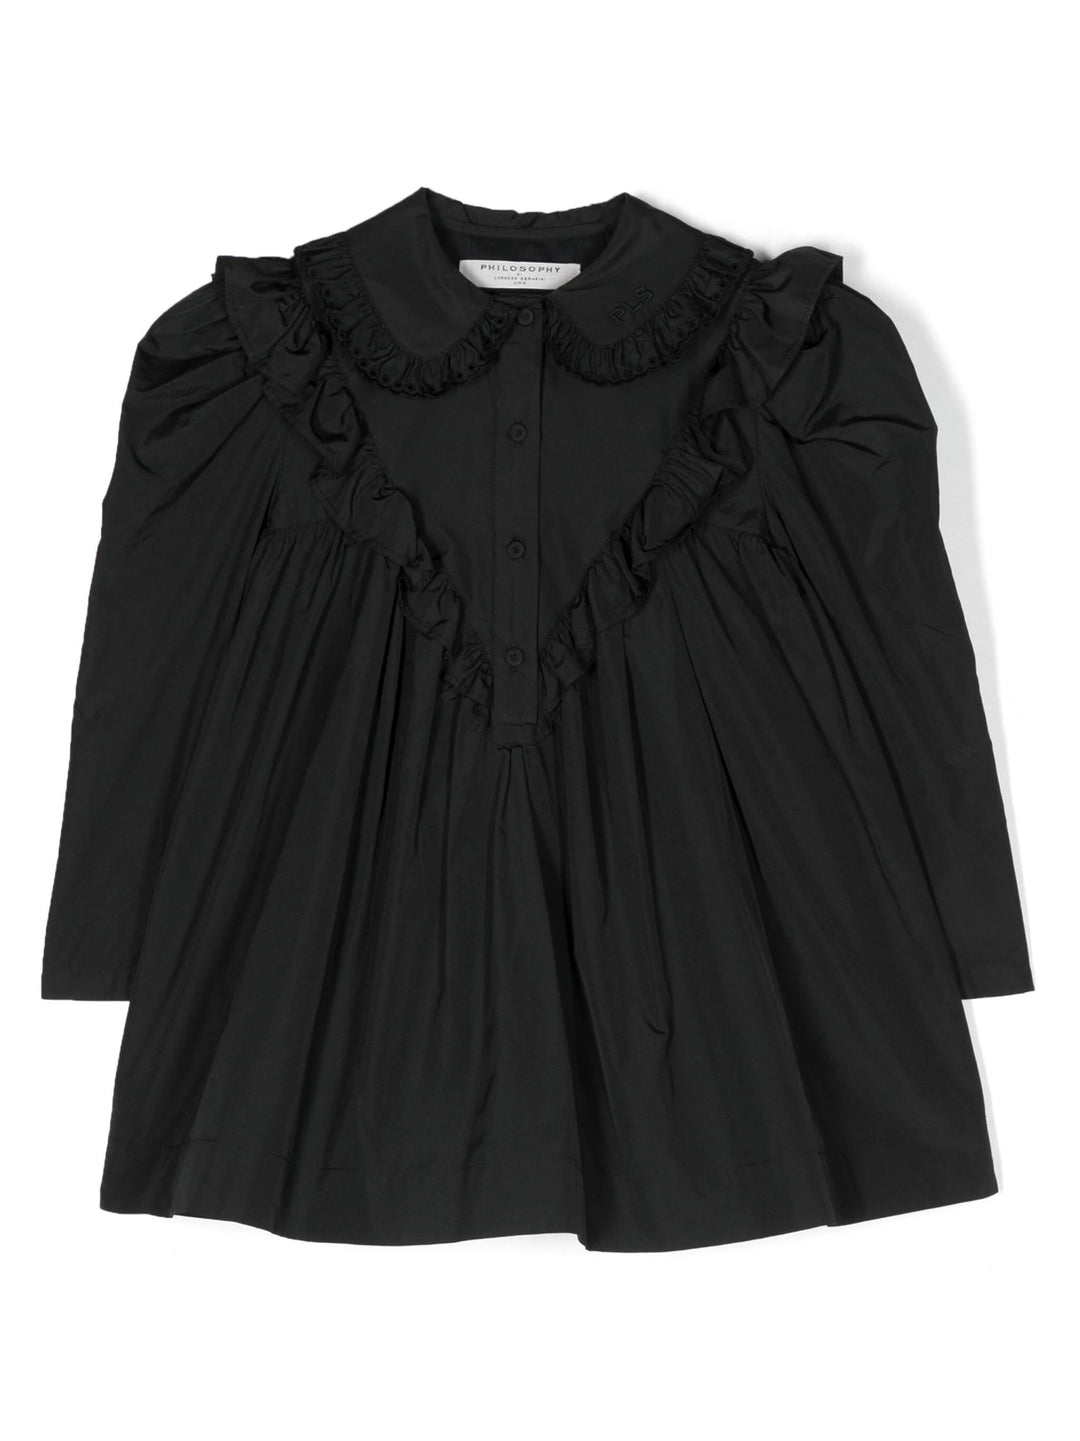 Collared Dress Button With Ruffled Detail - N000 Black - Posh New York